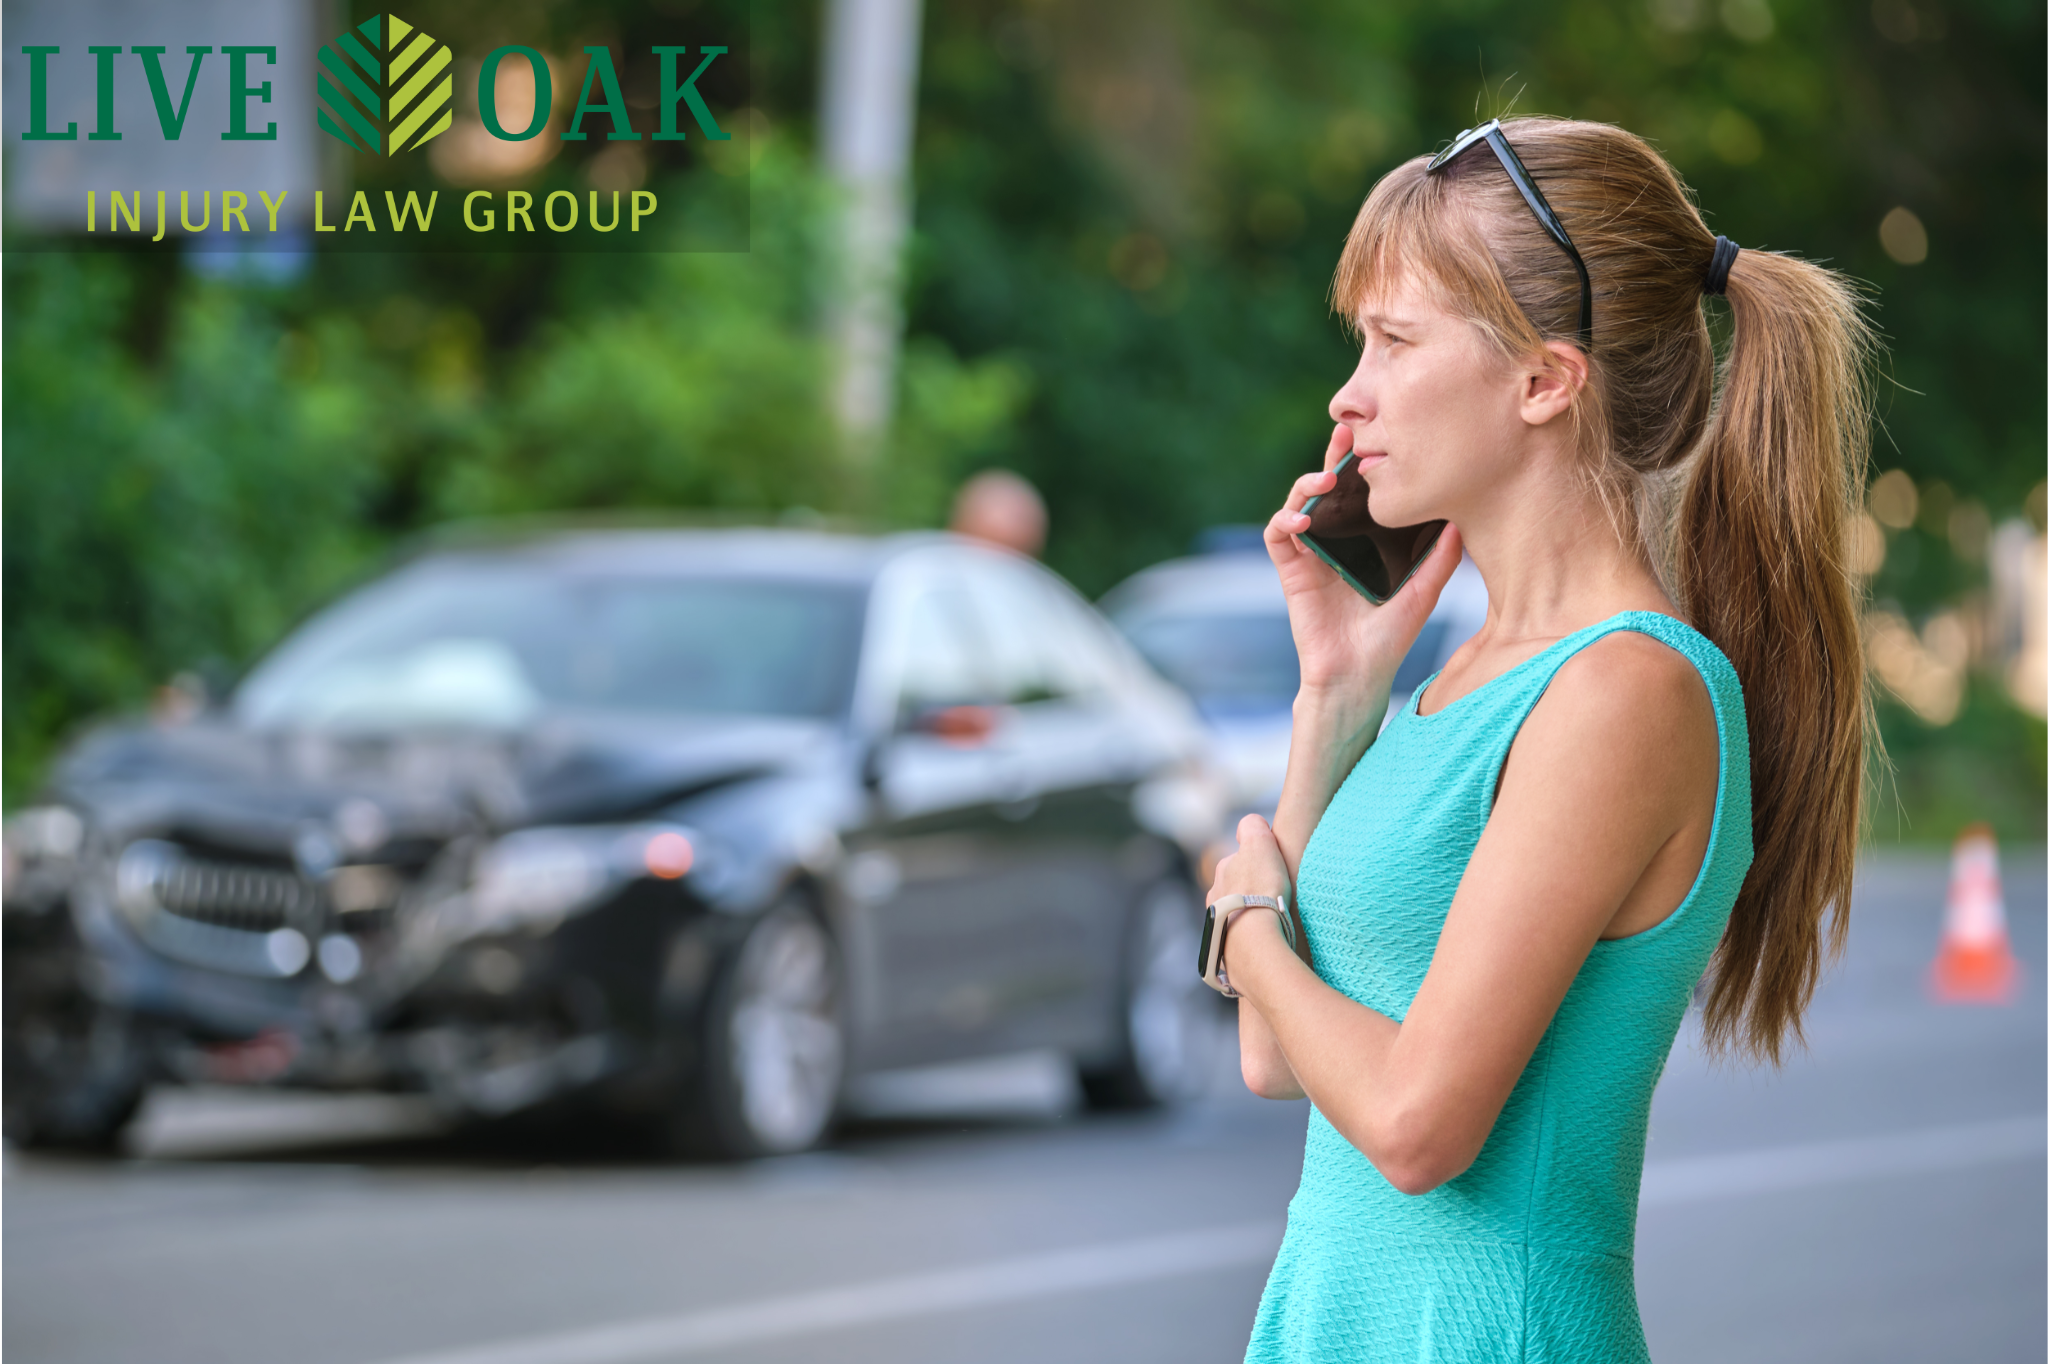 Young woman in turquoise dress on phone after Morgan Hill car accident with damaged black car in the background, showcasing Live Oak Injury Law Group's expertise.